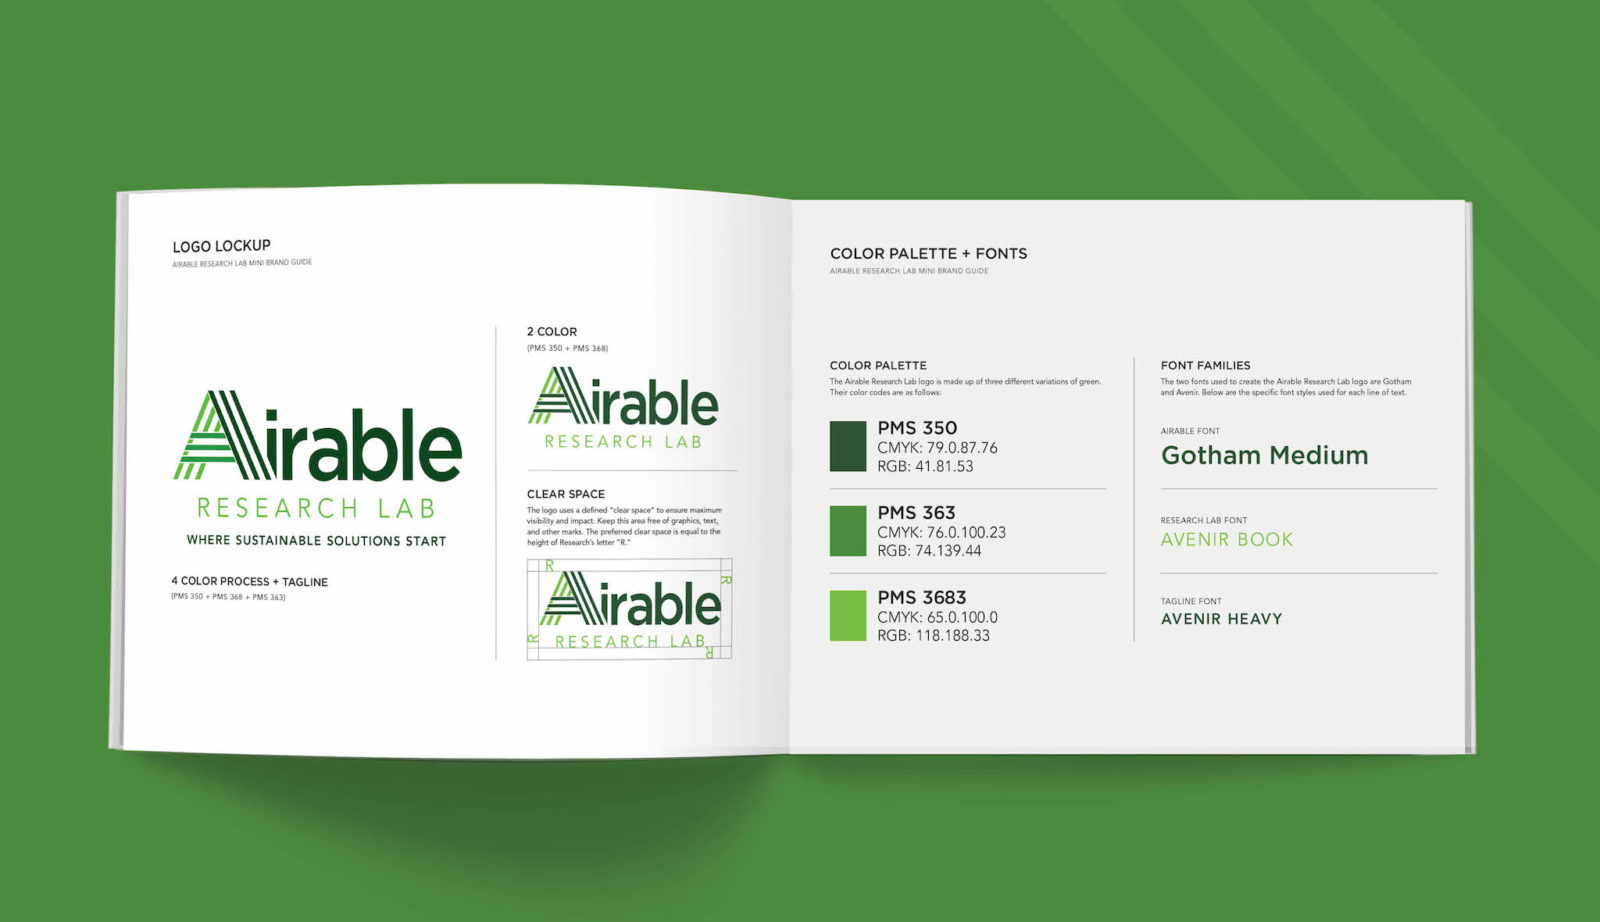 Airable Research Lab brand guidelines